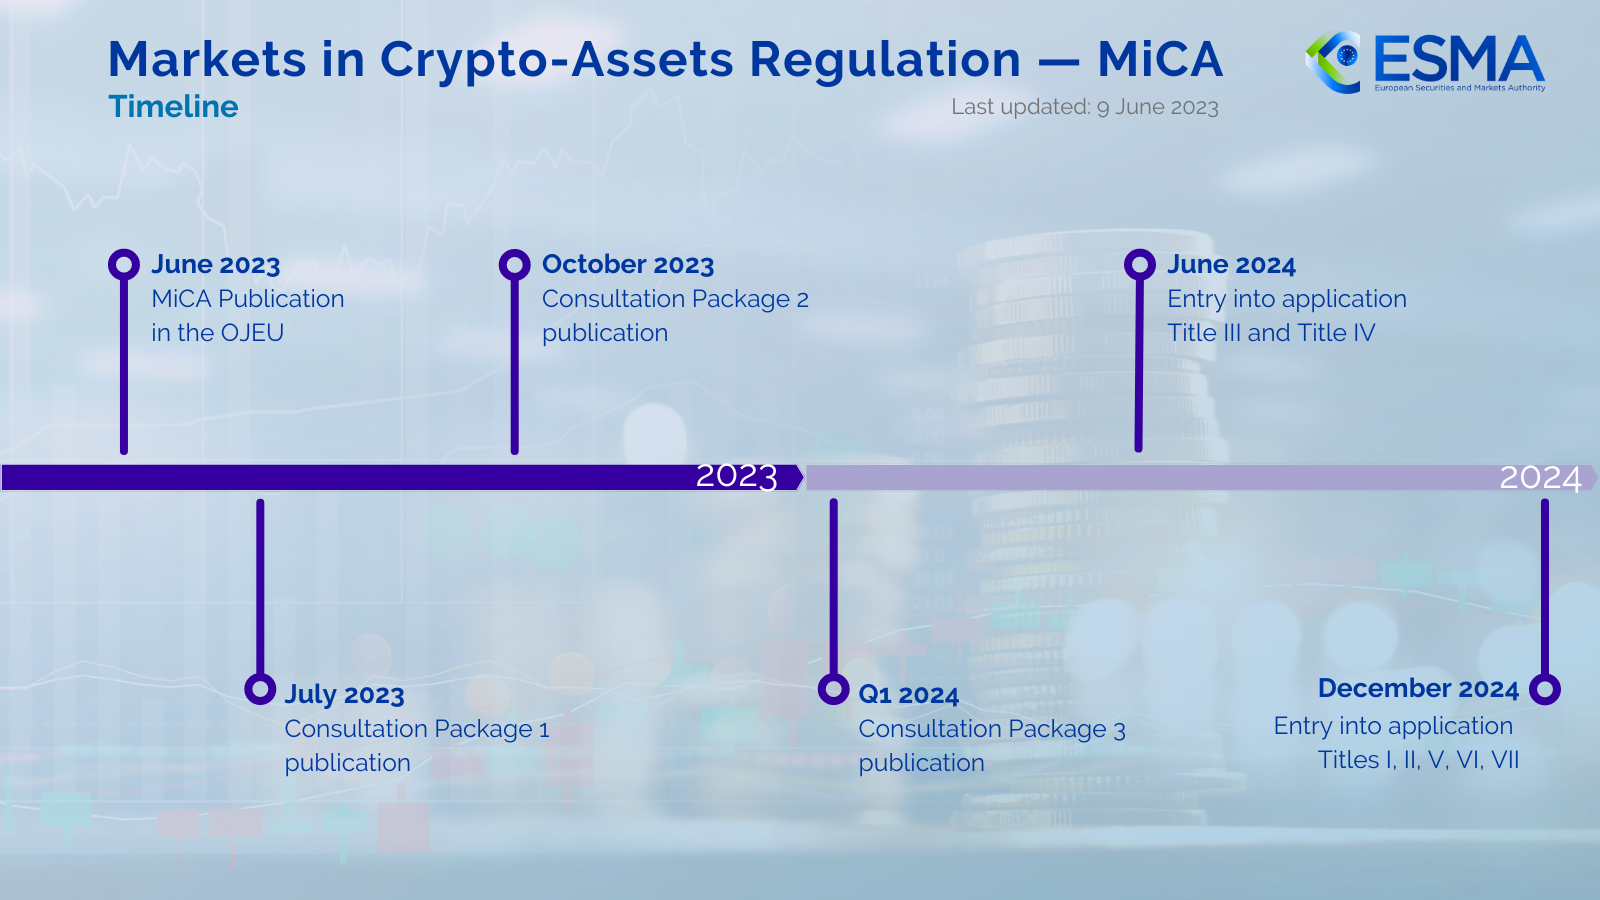 Timeline for the Implementation of the Markets in Crypto-Assets Regulation (MiCA) by ESMA